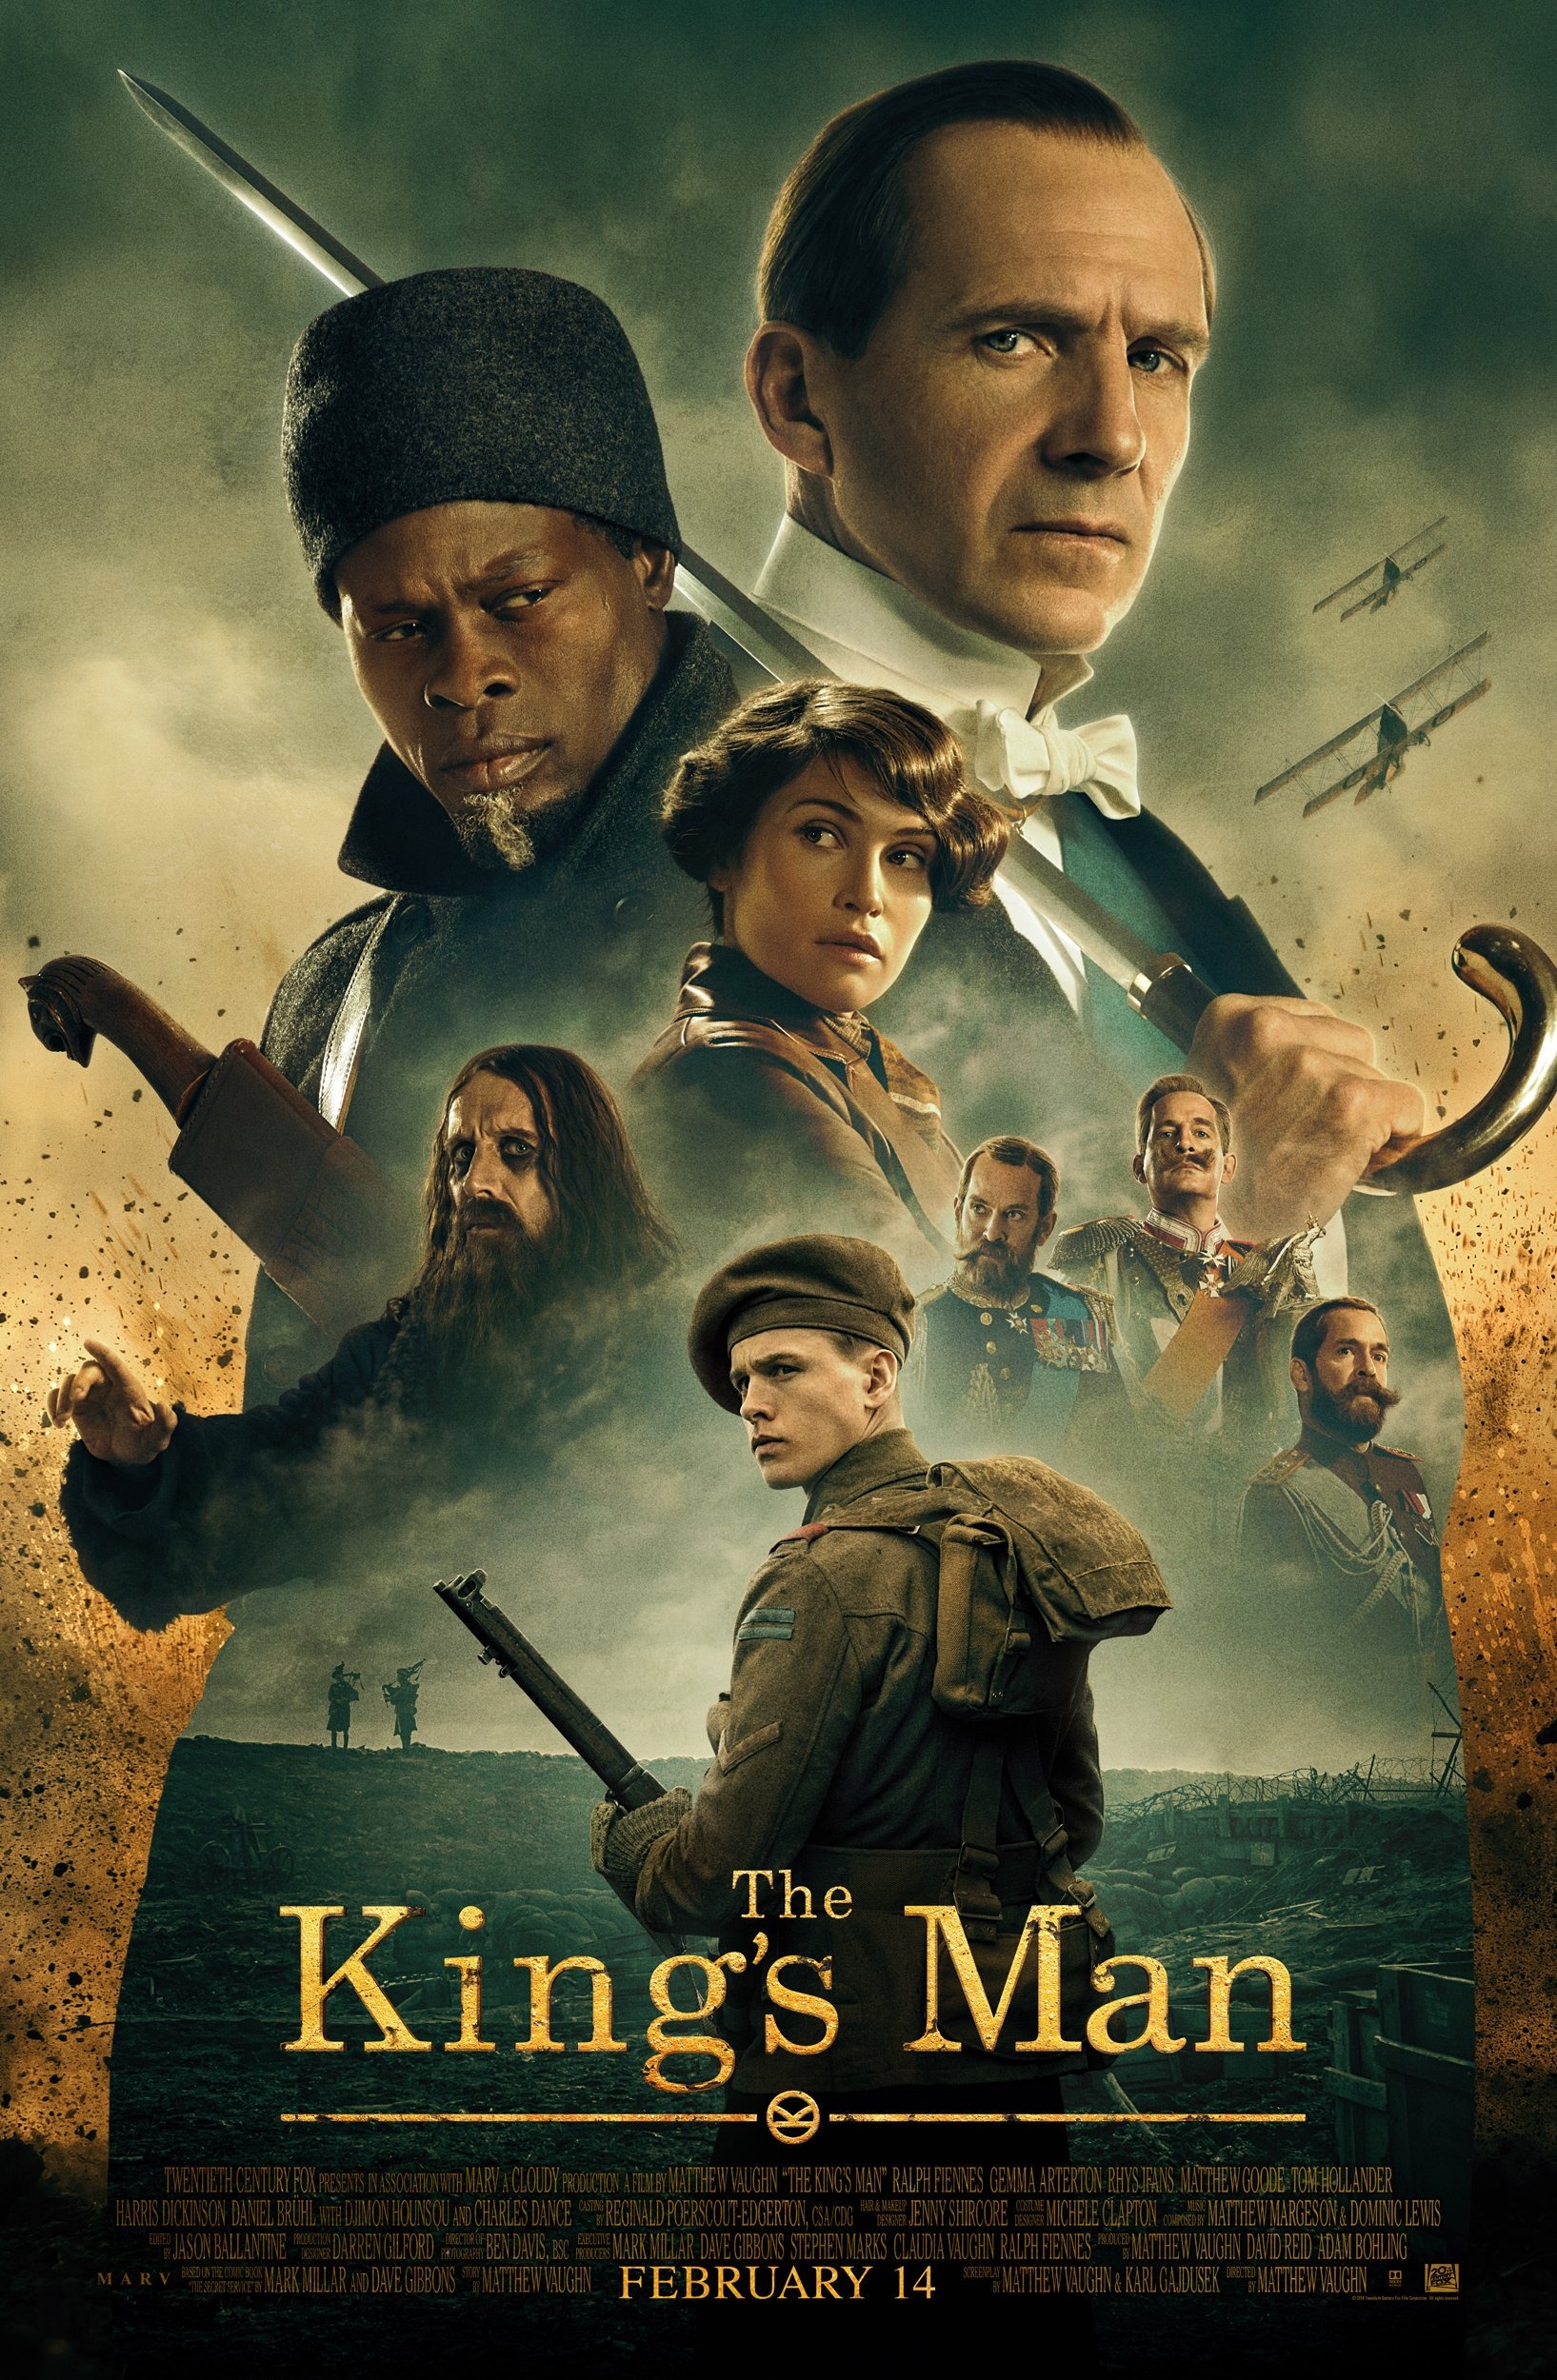 The Kings Man Movie Poster 2